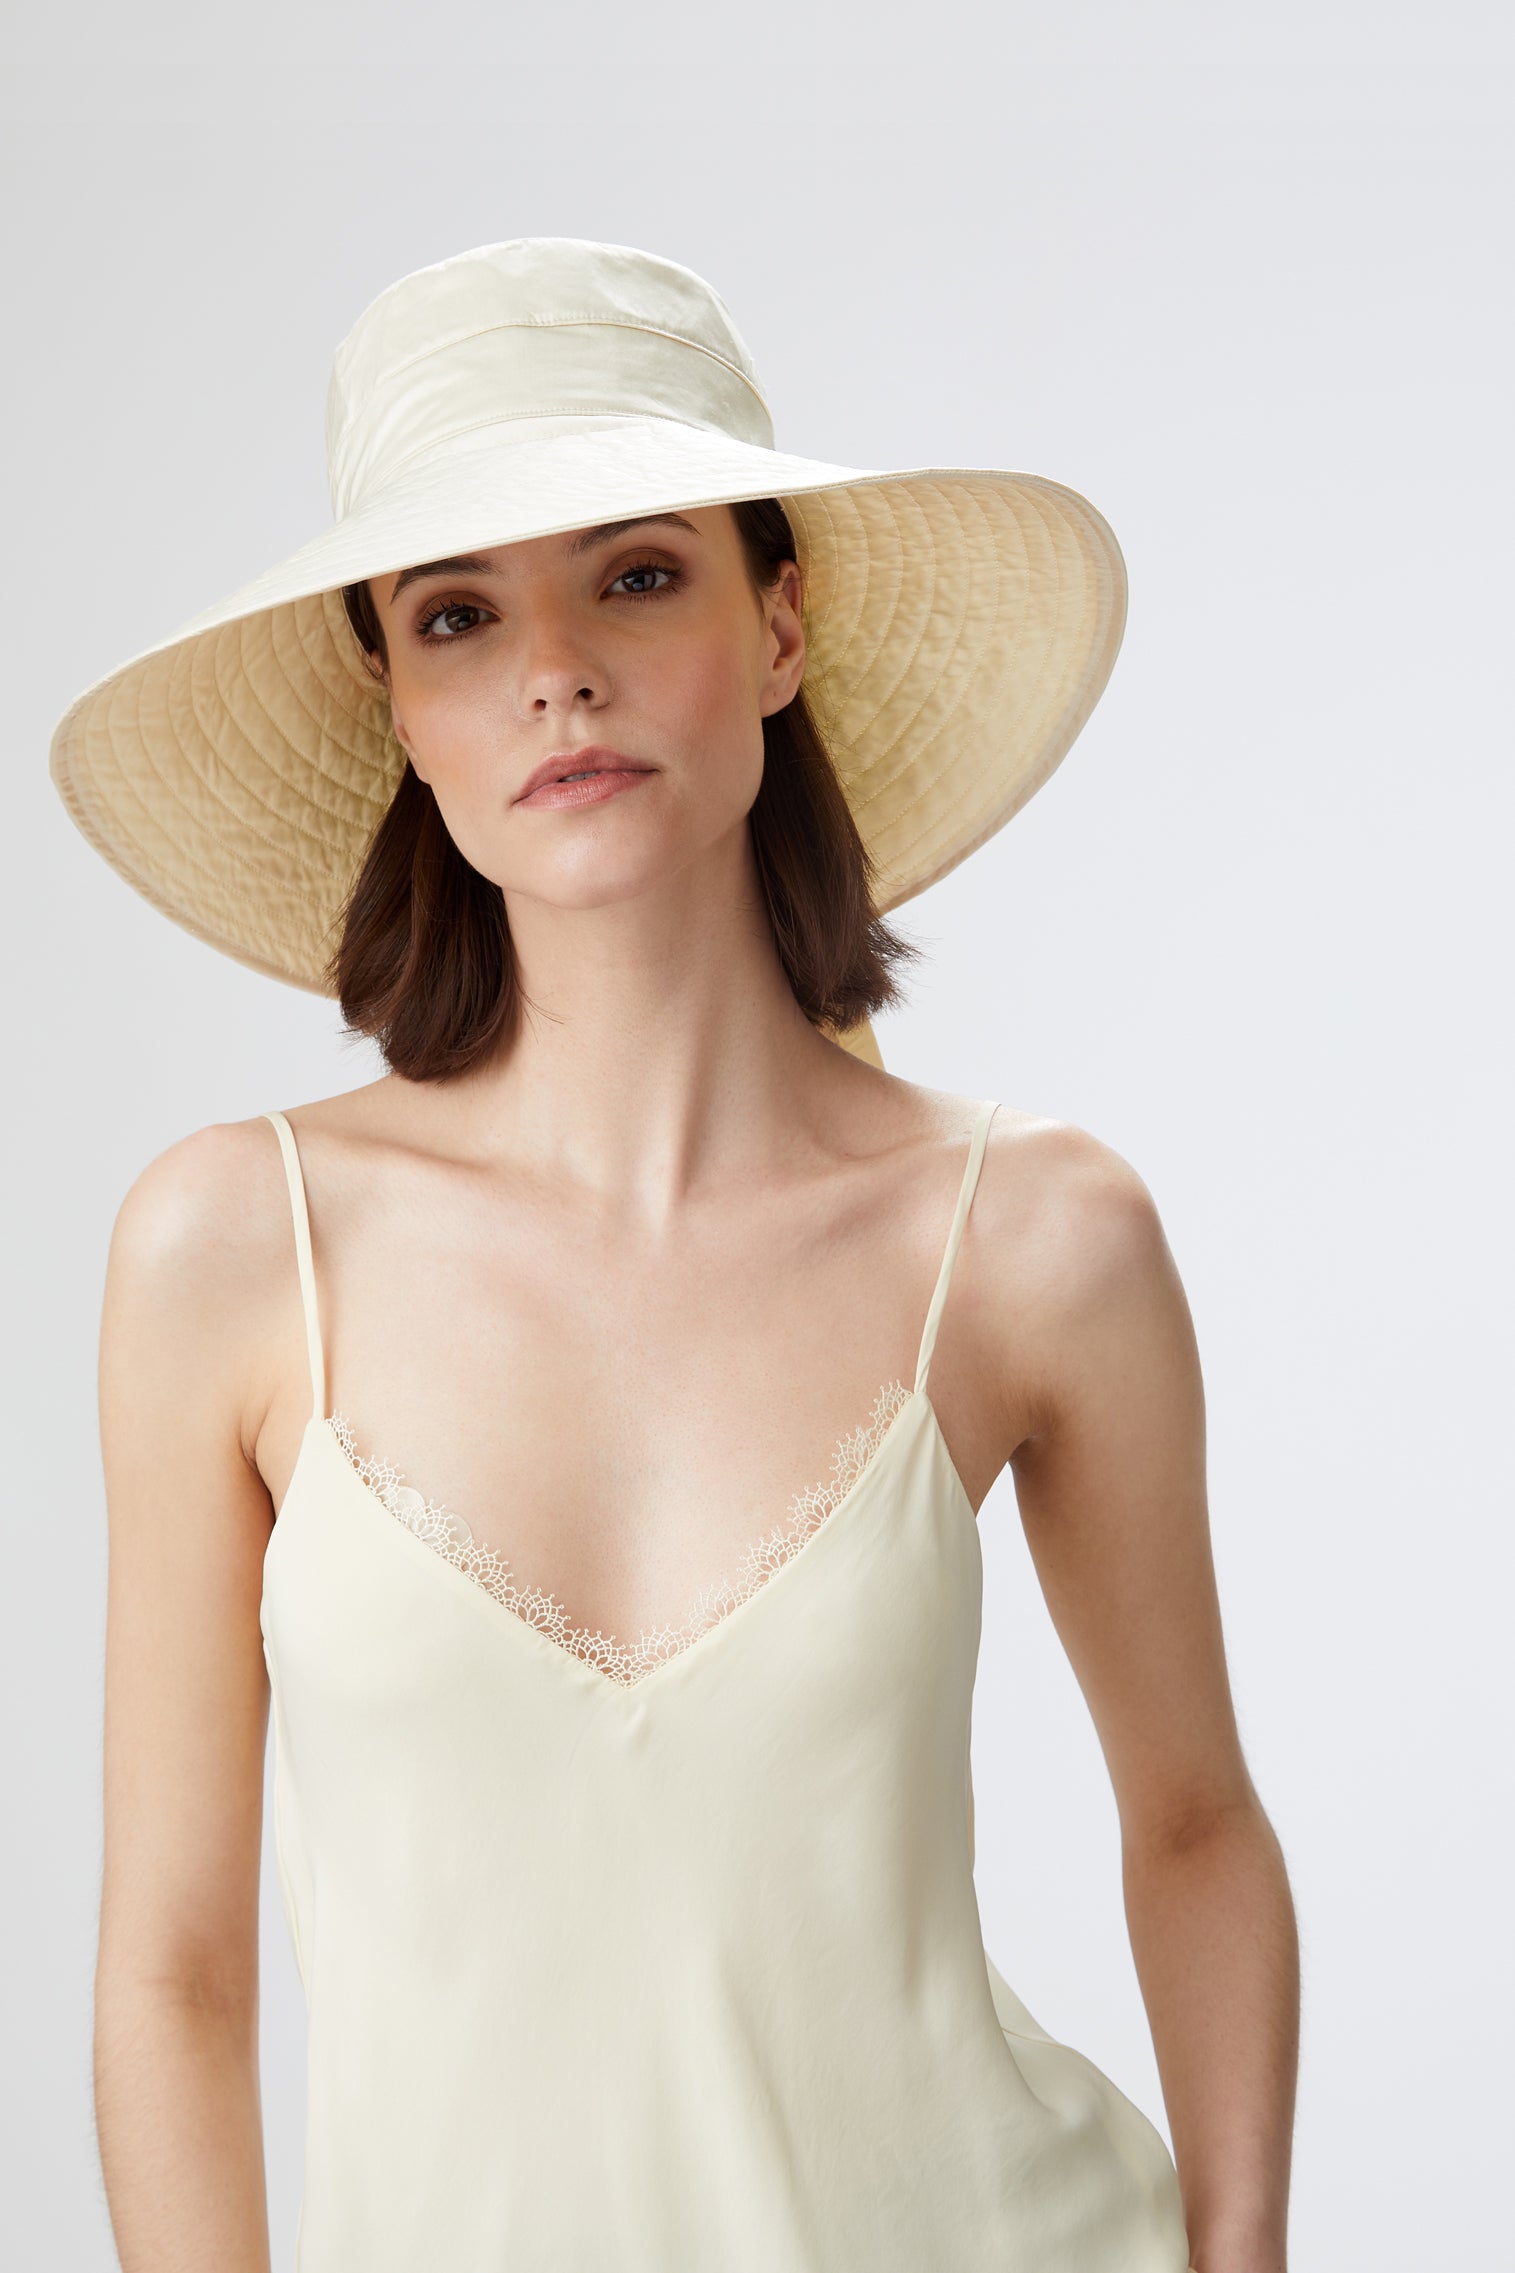 Clemence Silk Sun Hat - Packable Hats for Travel - Lock & Co. Hatters London UK